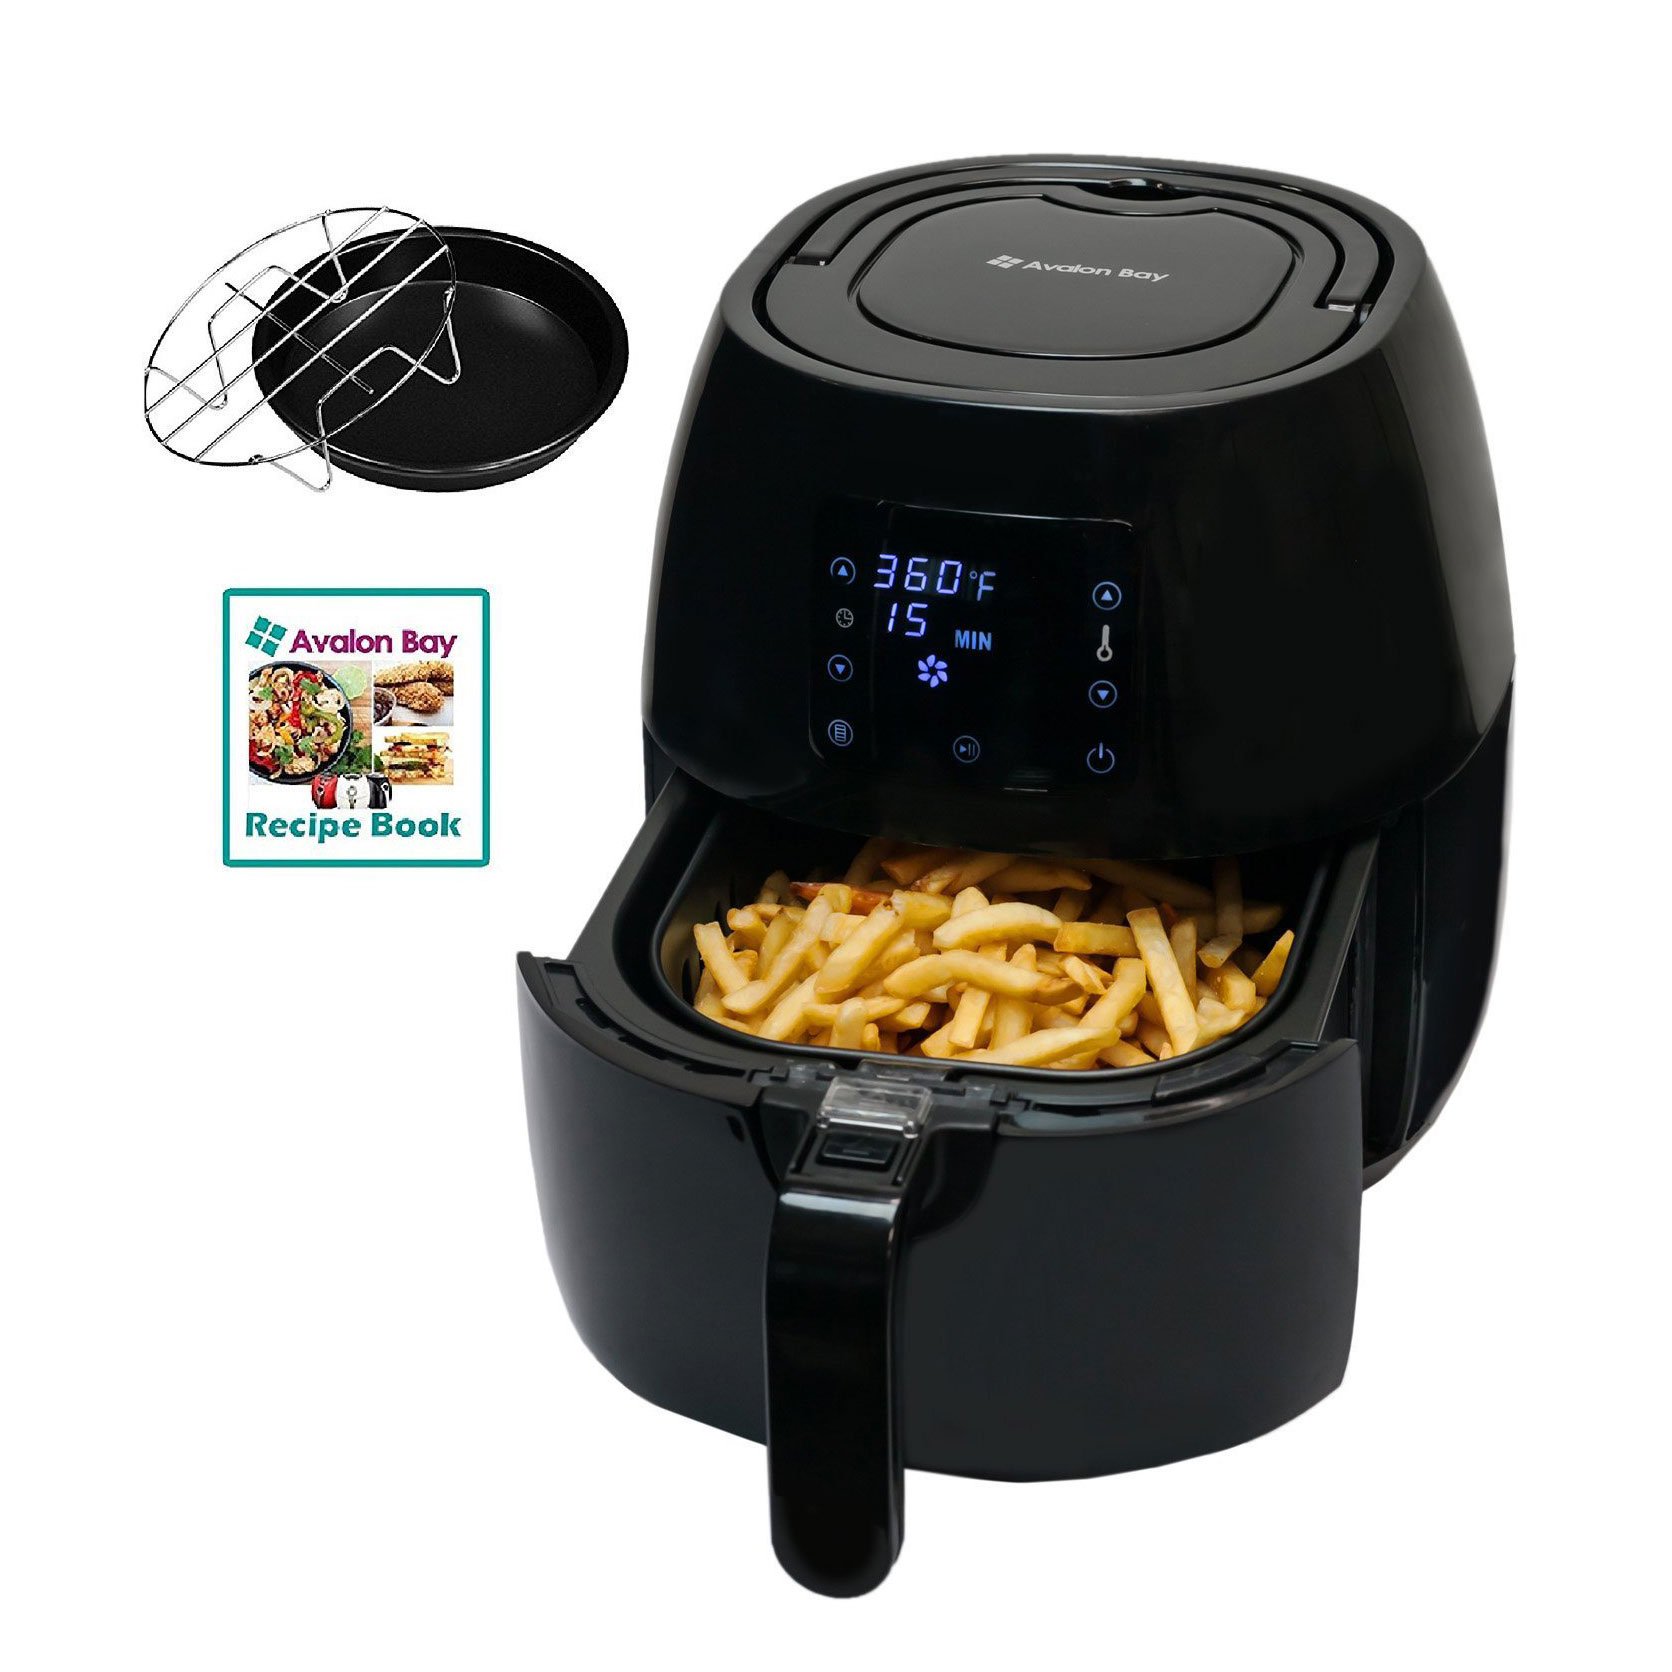 Air Fryer Oven Cooker with Knob or Digital Control Options, 2.2 QT